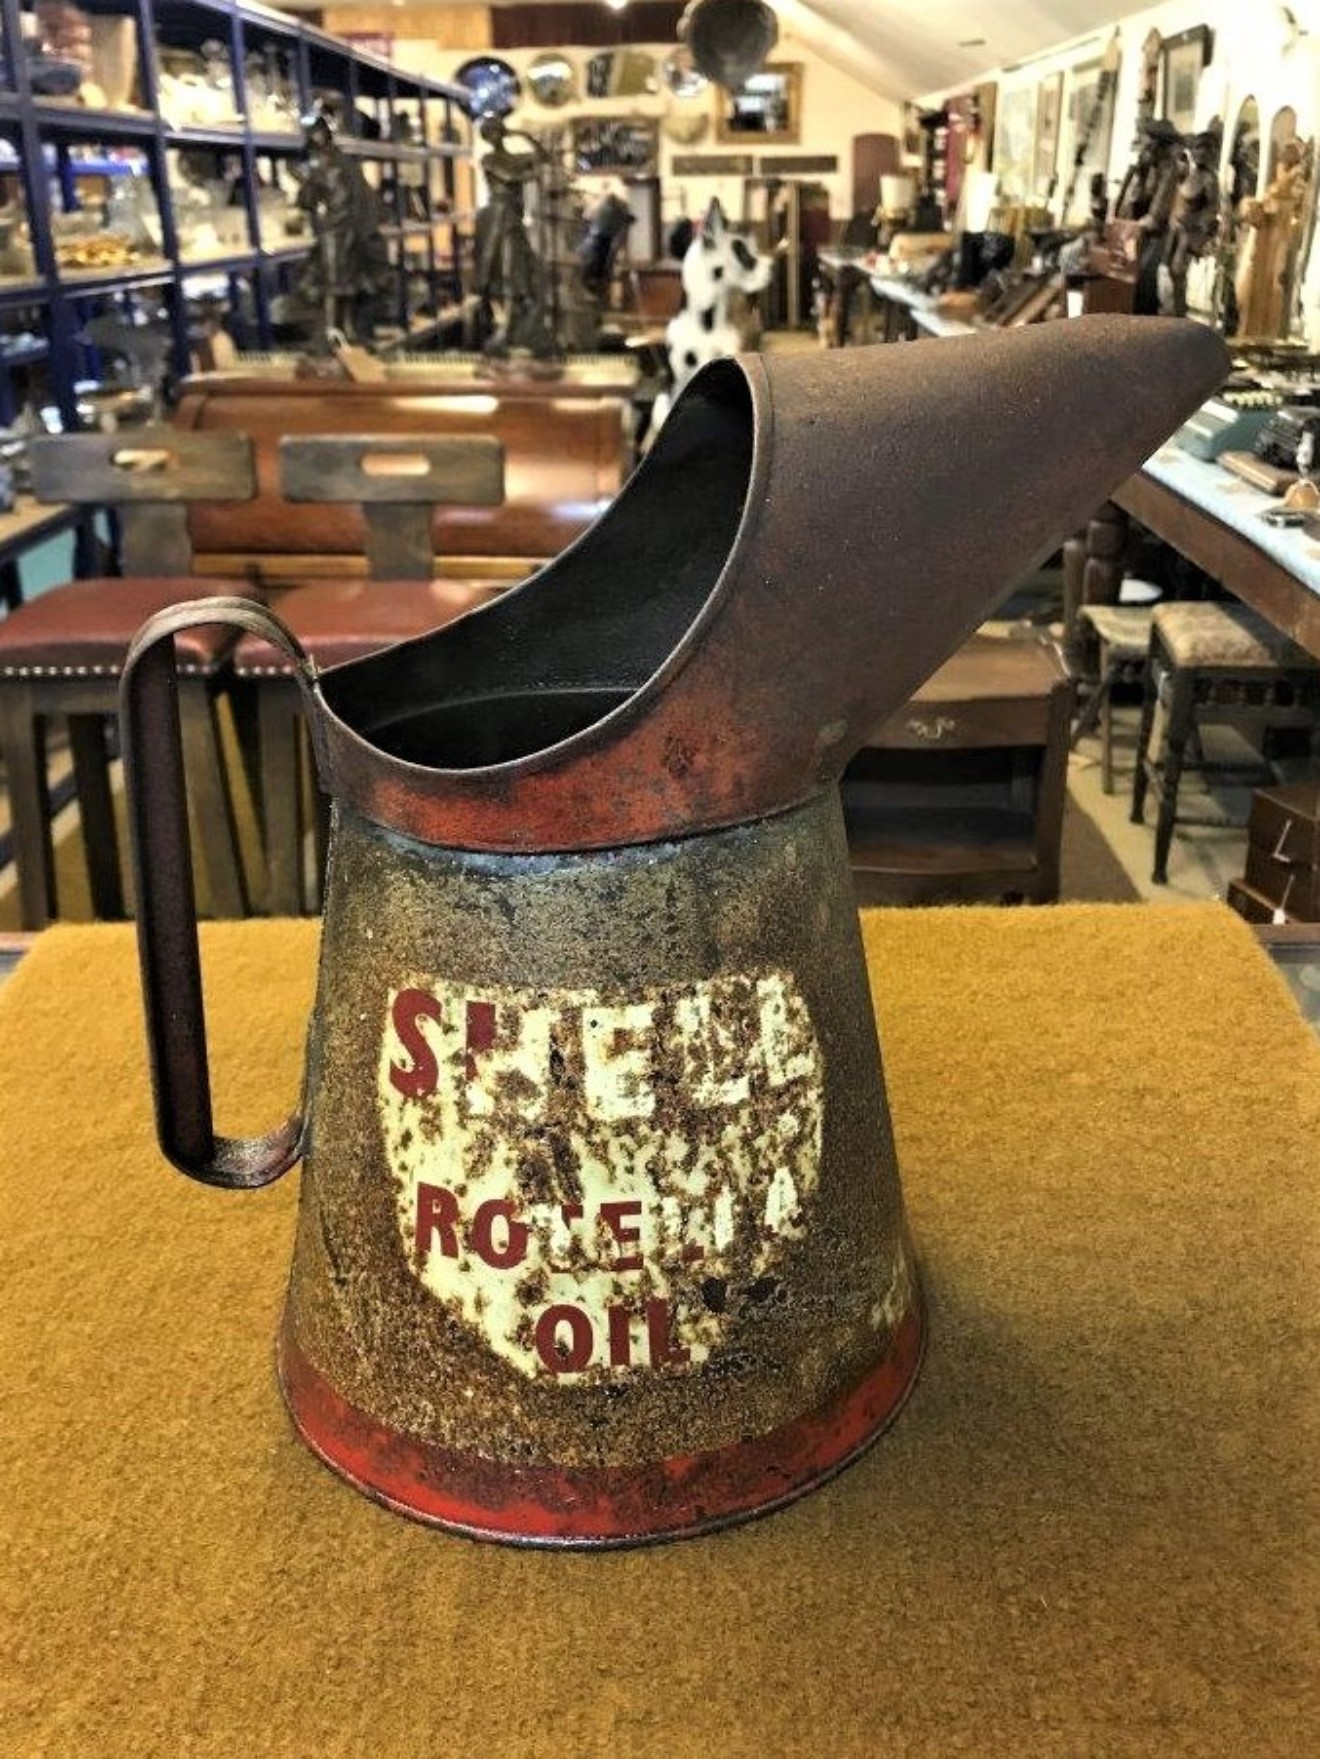 Vintage Shell Rotella 1 Gallon Oil Can